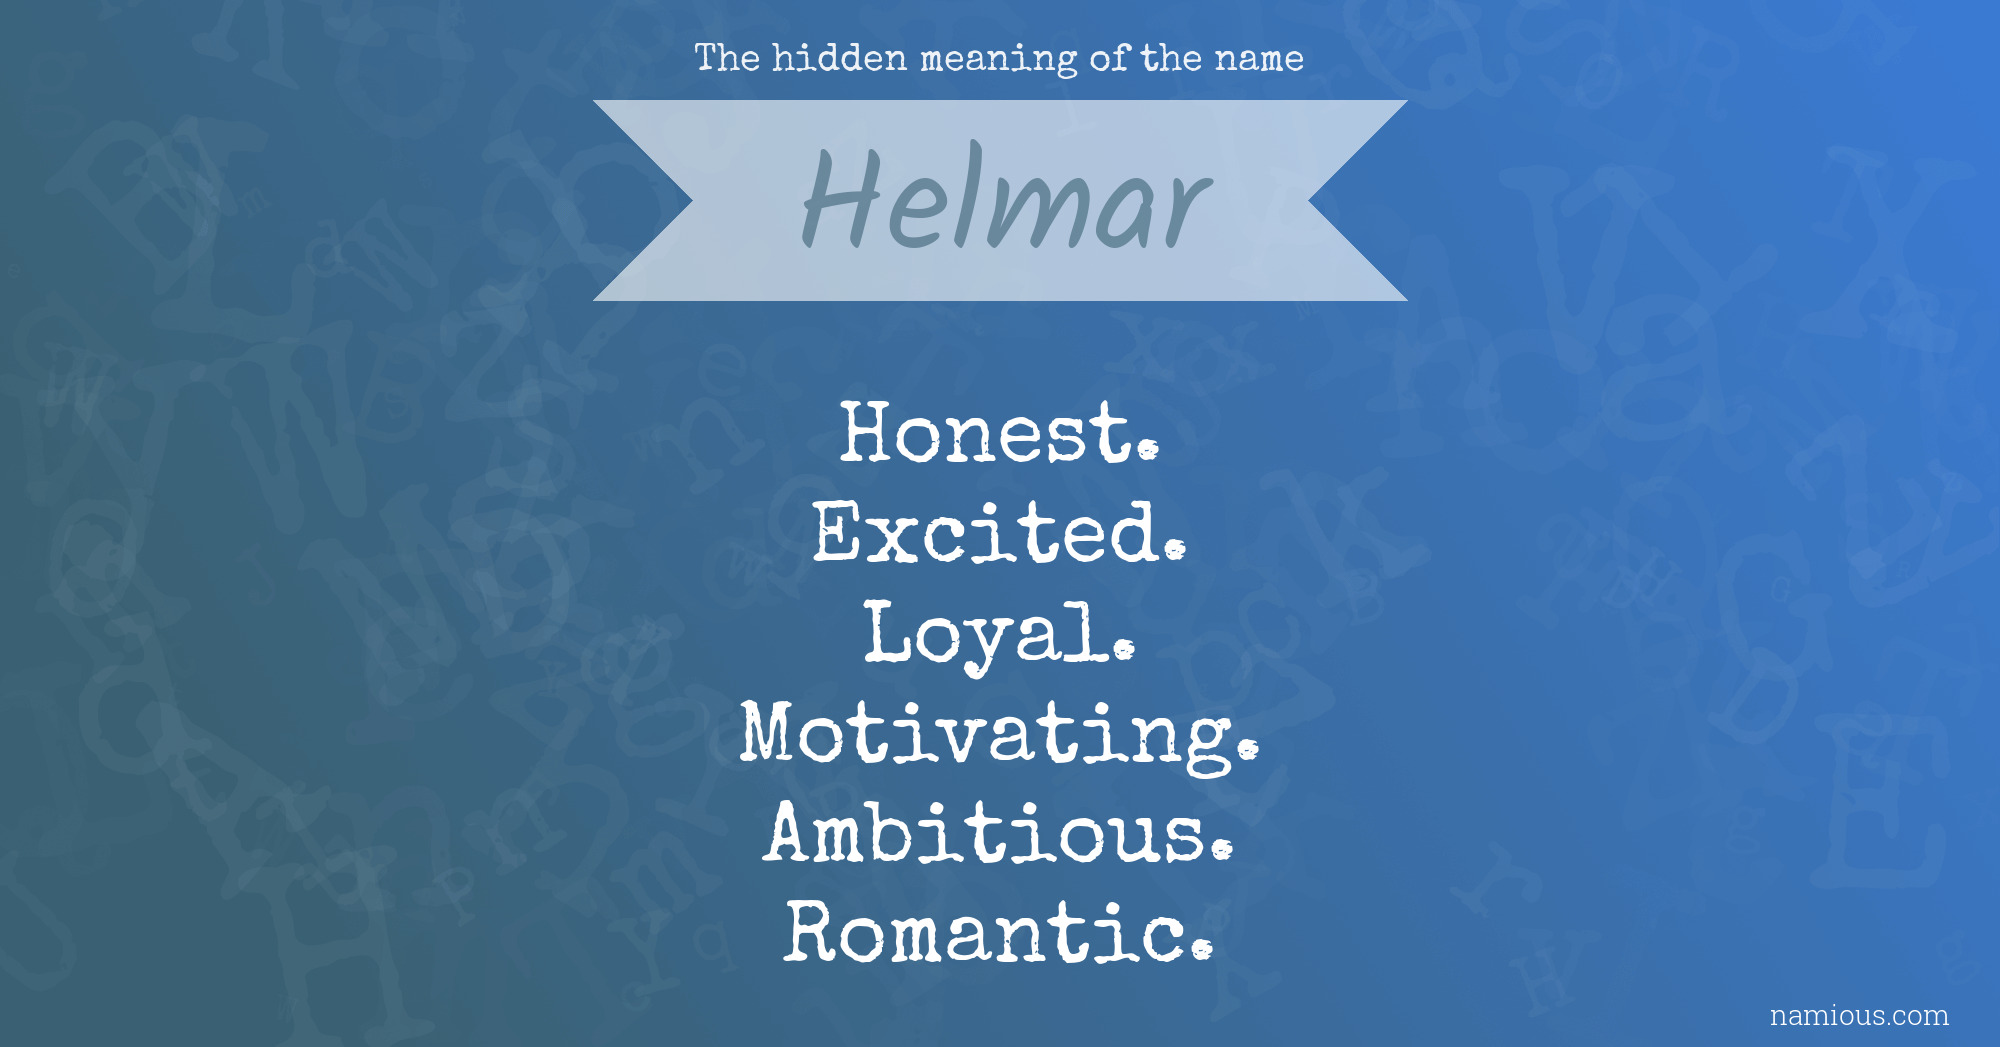 The hidden meaning of the name Helmar